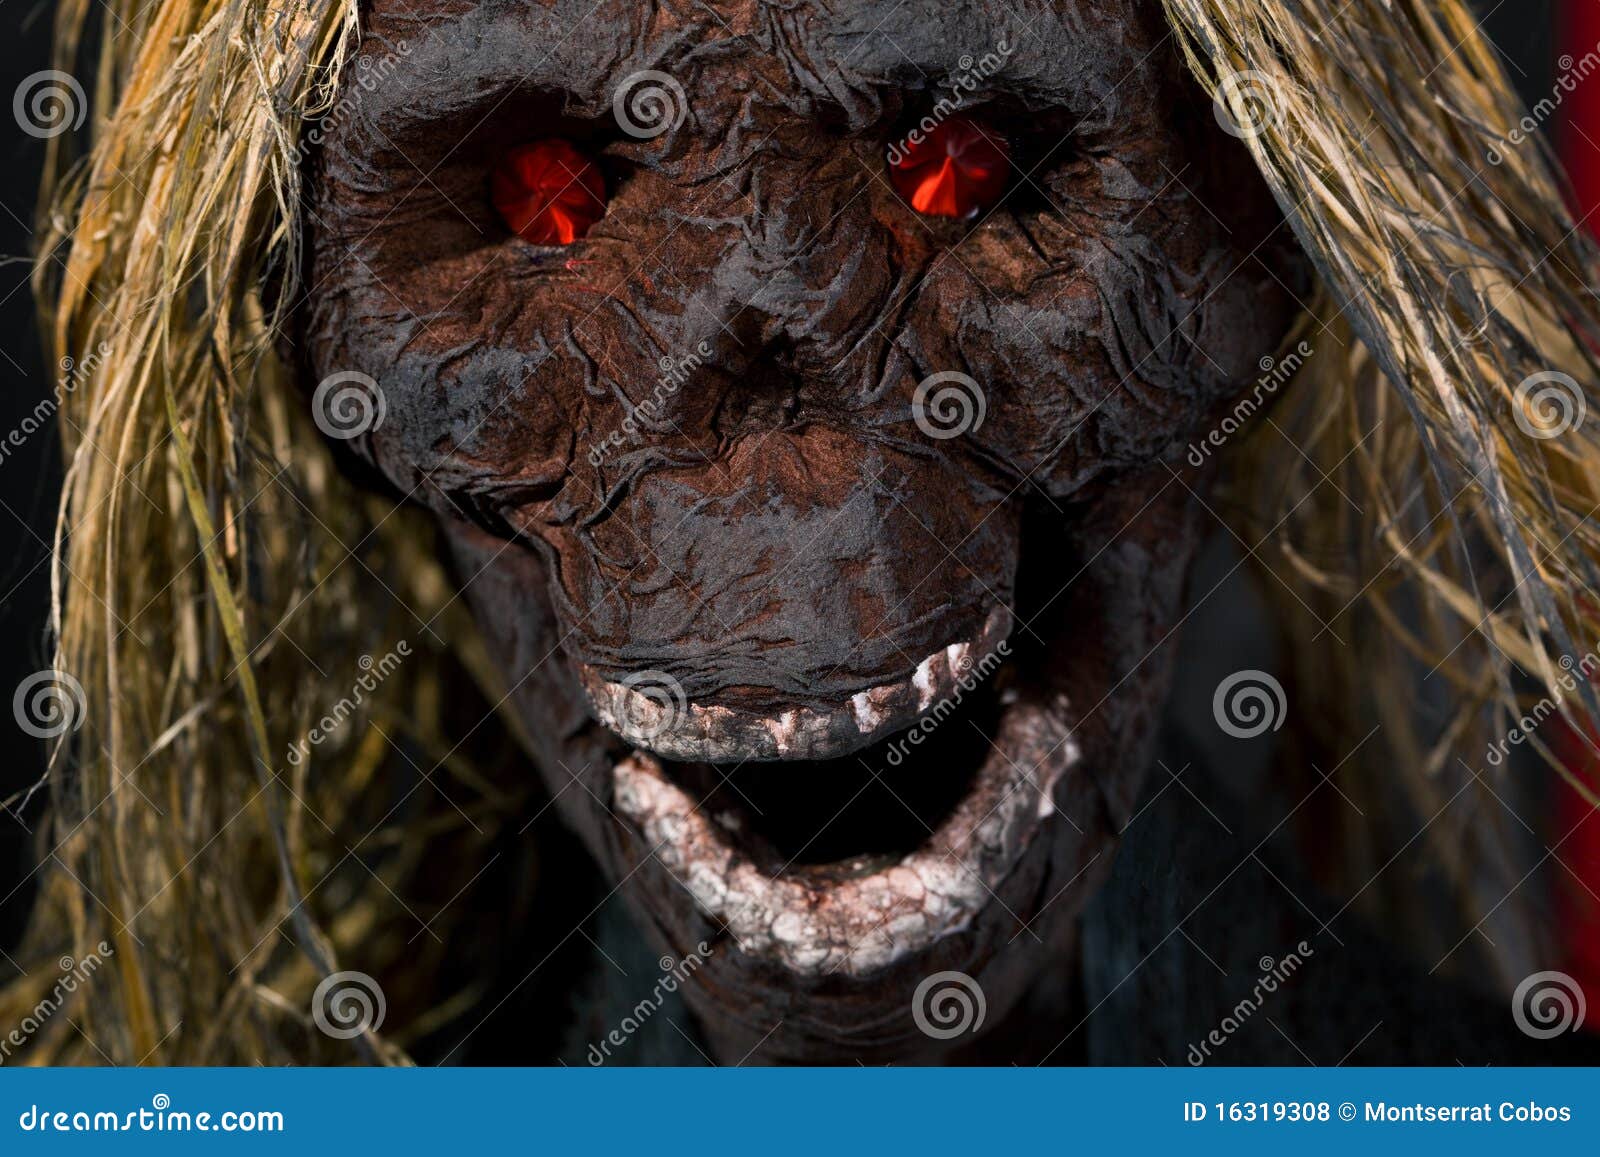 Scary Halloween face stock photo. Image of murder, devil 16319308